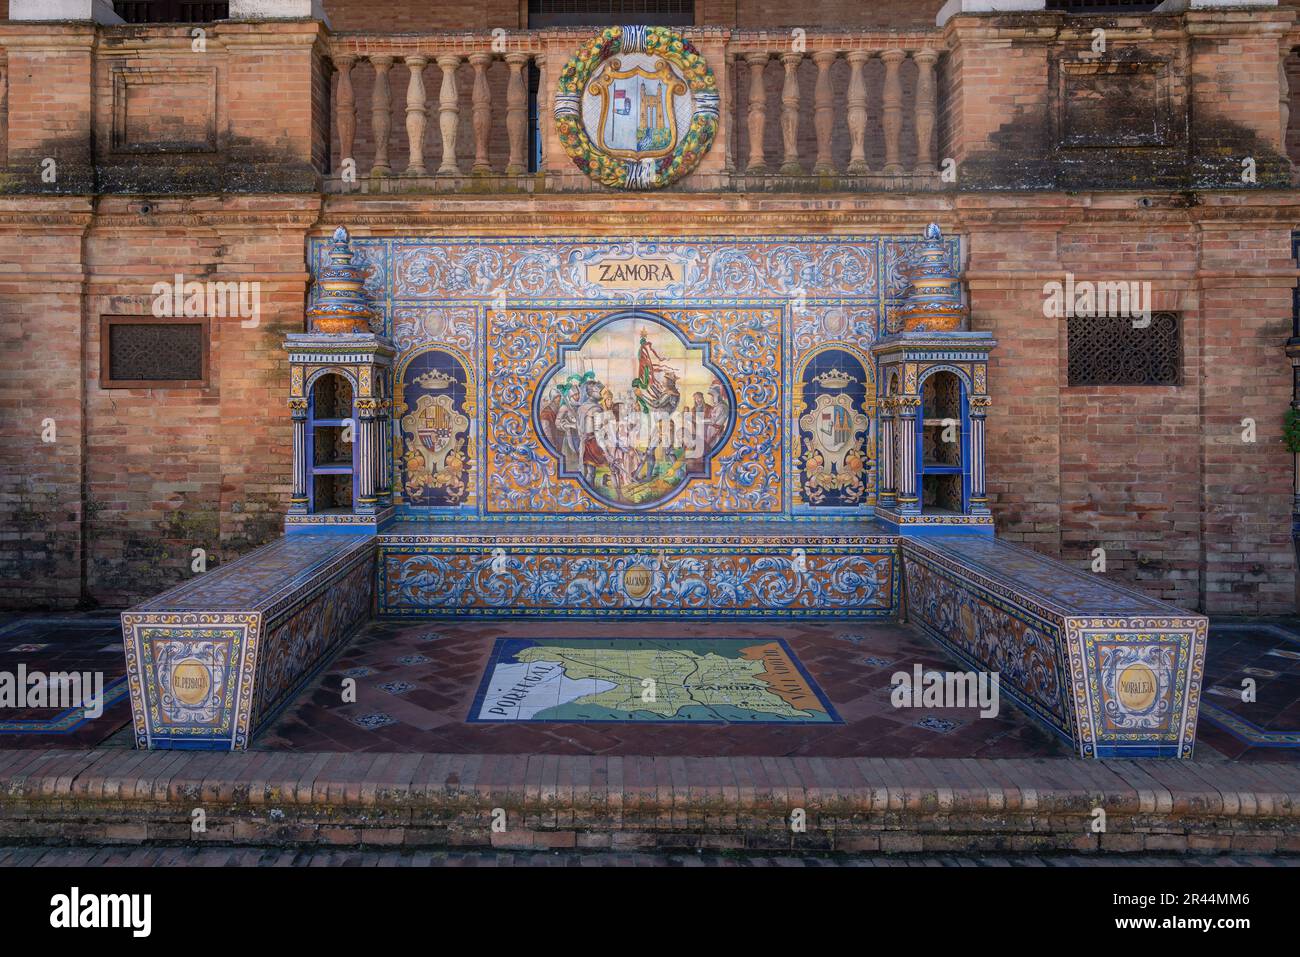 Alcove with bench and tiles representing Zamora Province - Seville, Andalusia, Spain Stock Photo